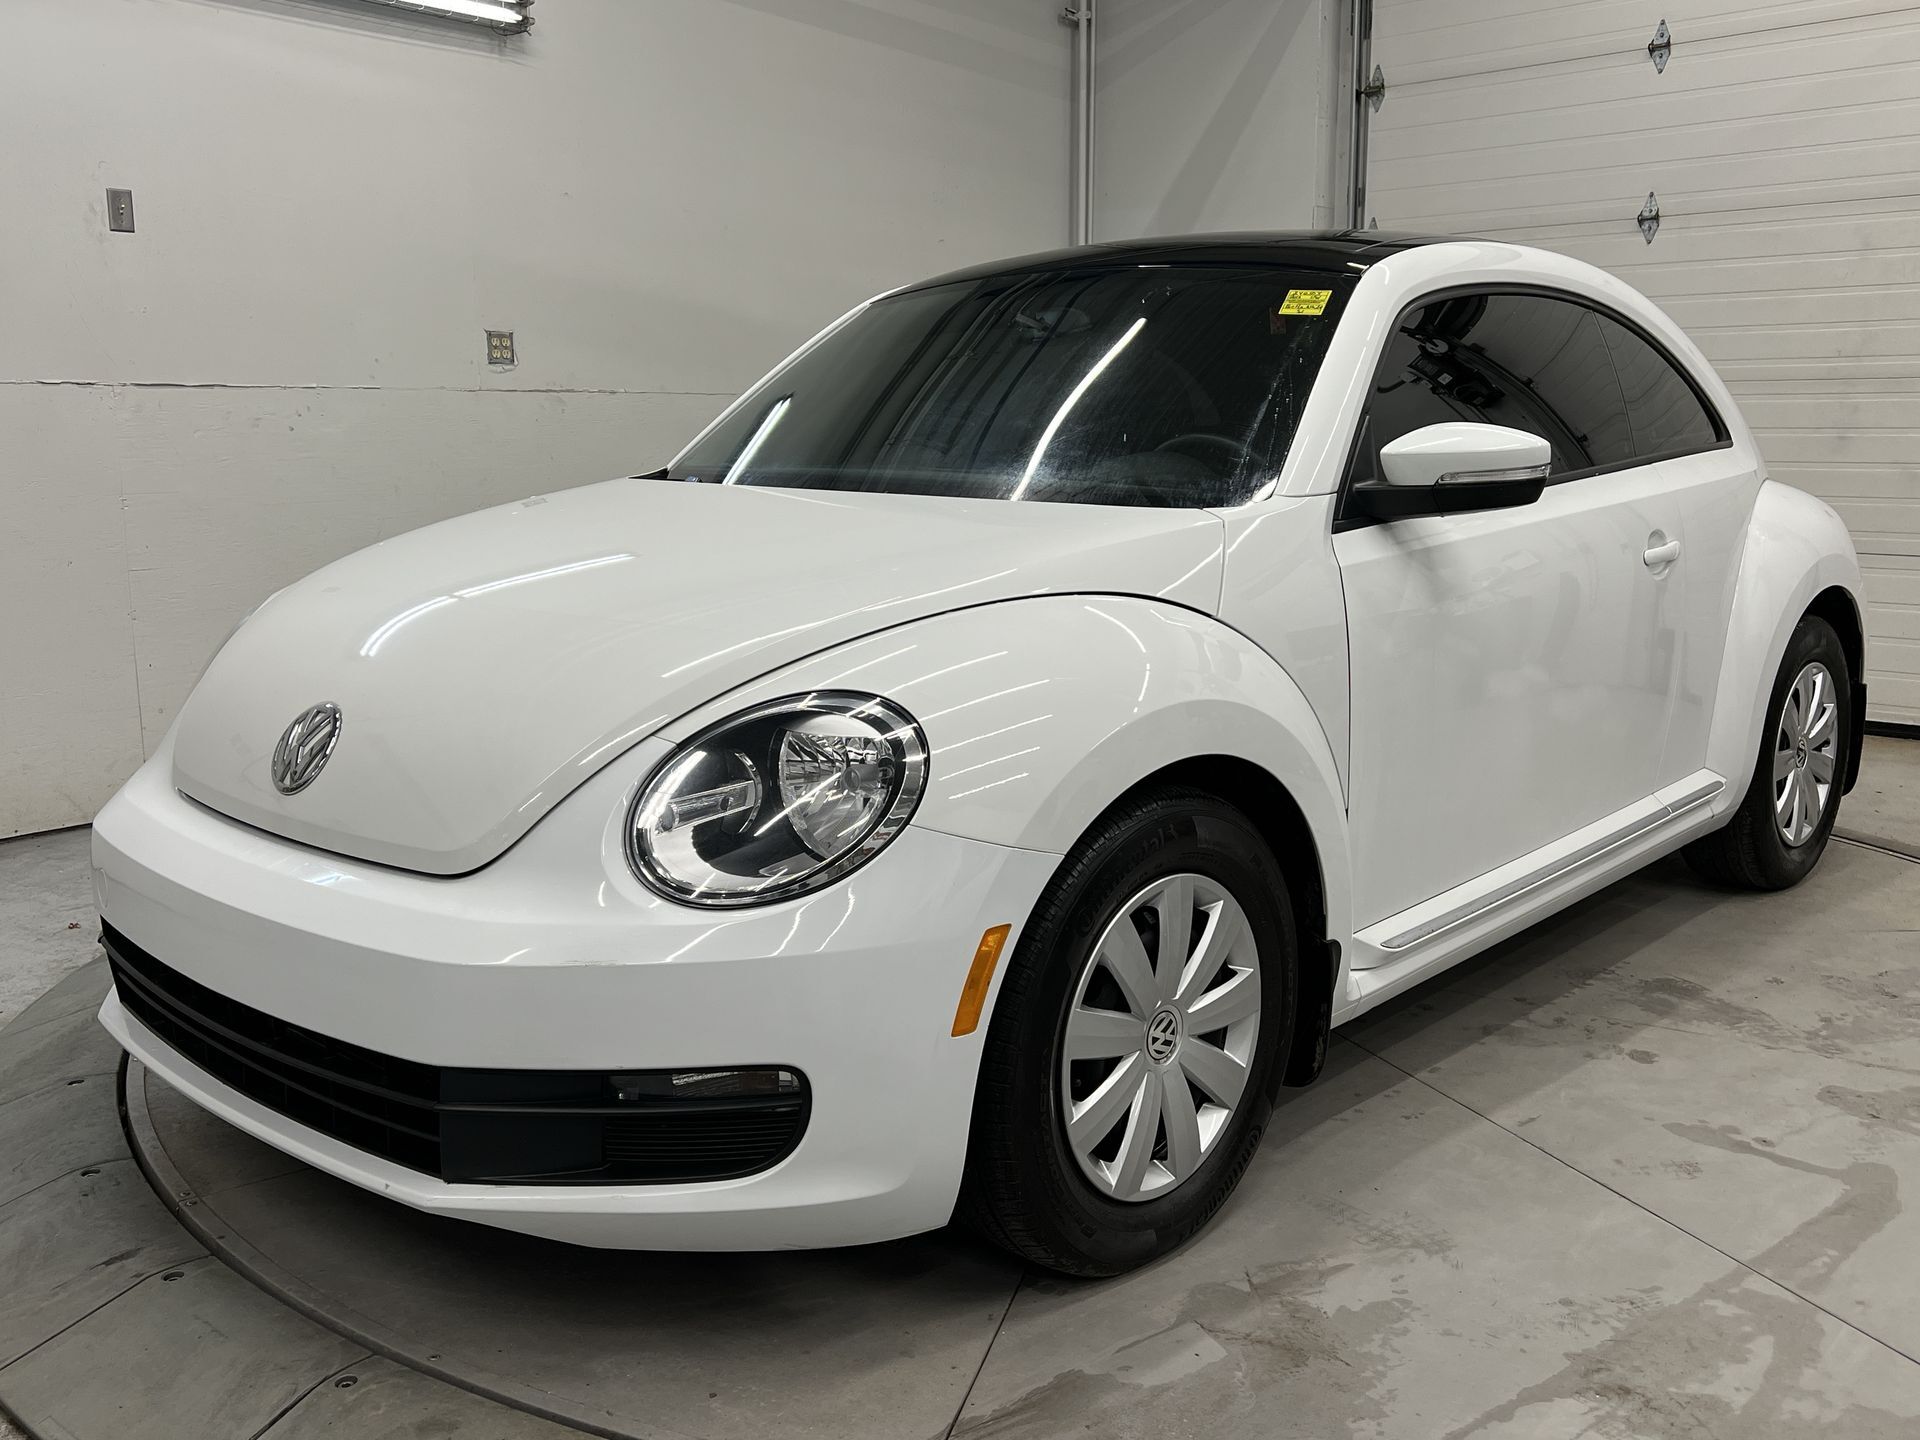 2016 Volkswagen Beetle PANO ROOF| REAR CAM| HTD SEATS| CARPLAY| LOW KMS!